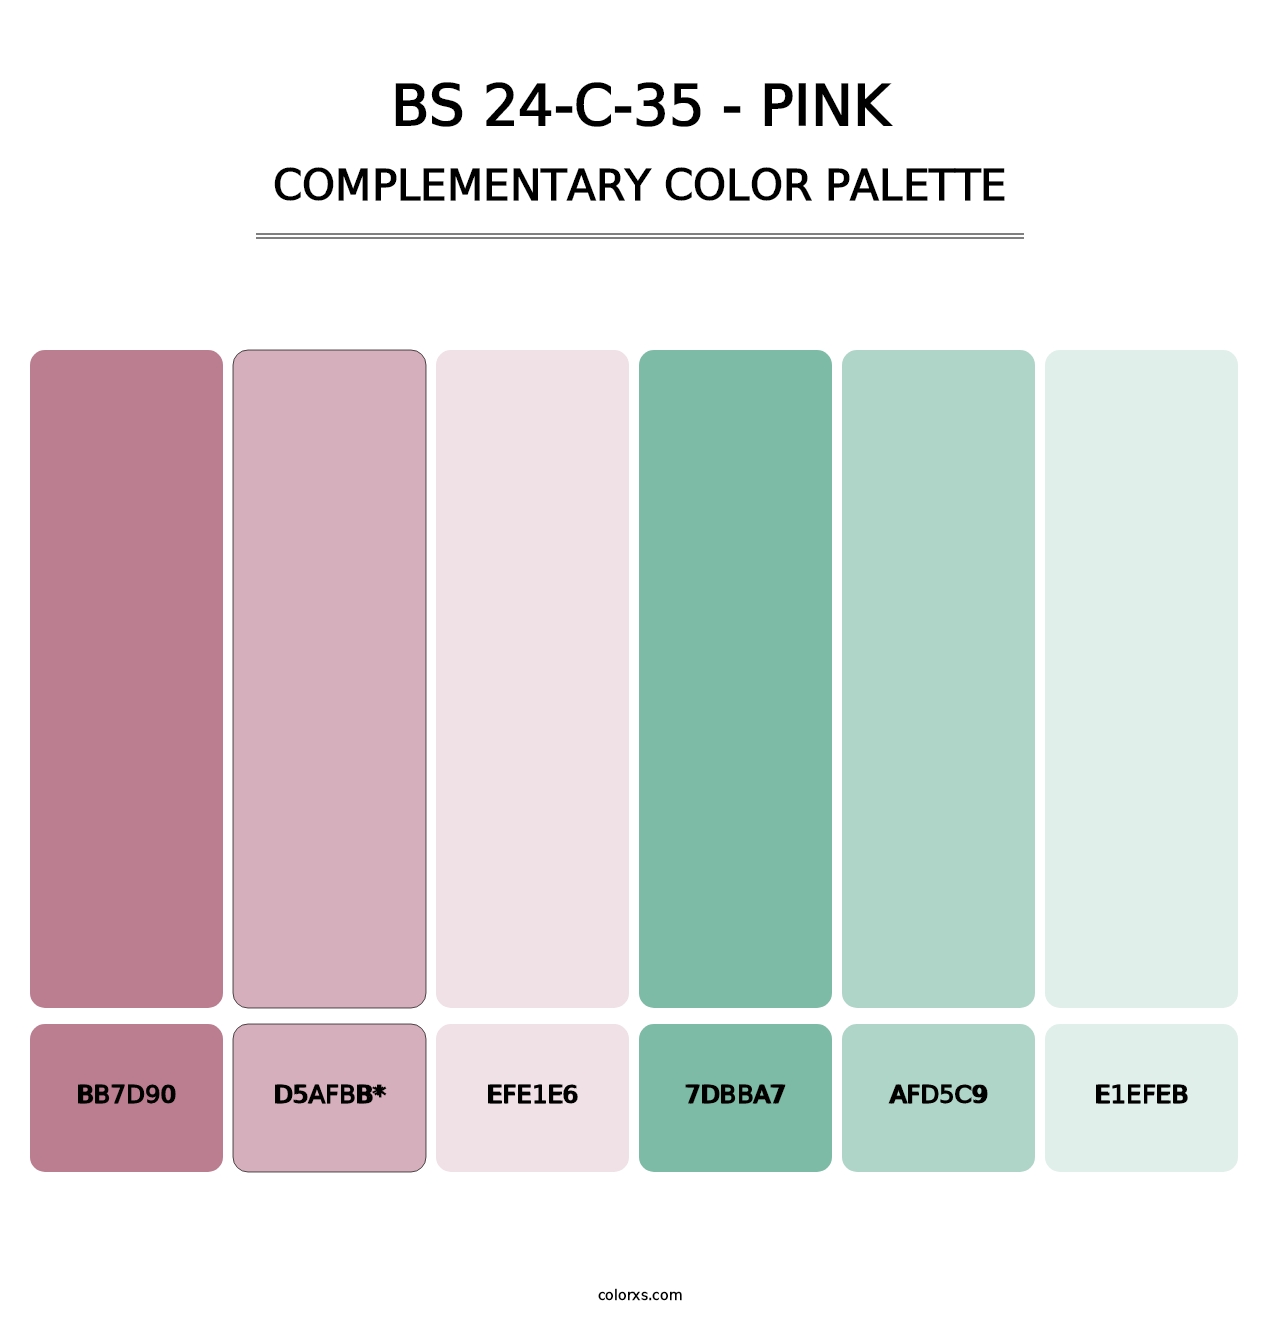 BS 24-C-35 - Pink - Complementary Color Palette